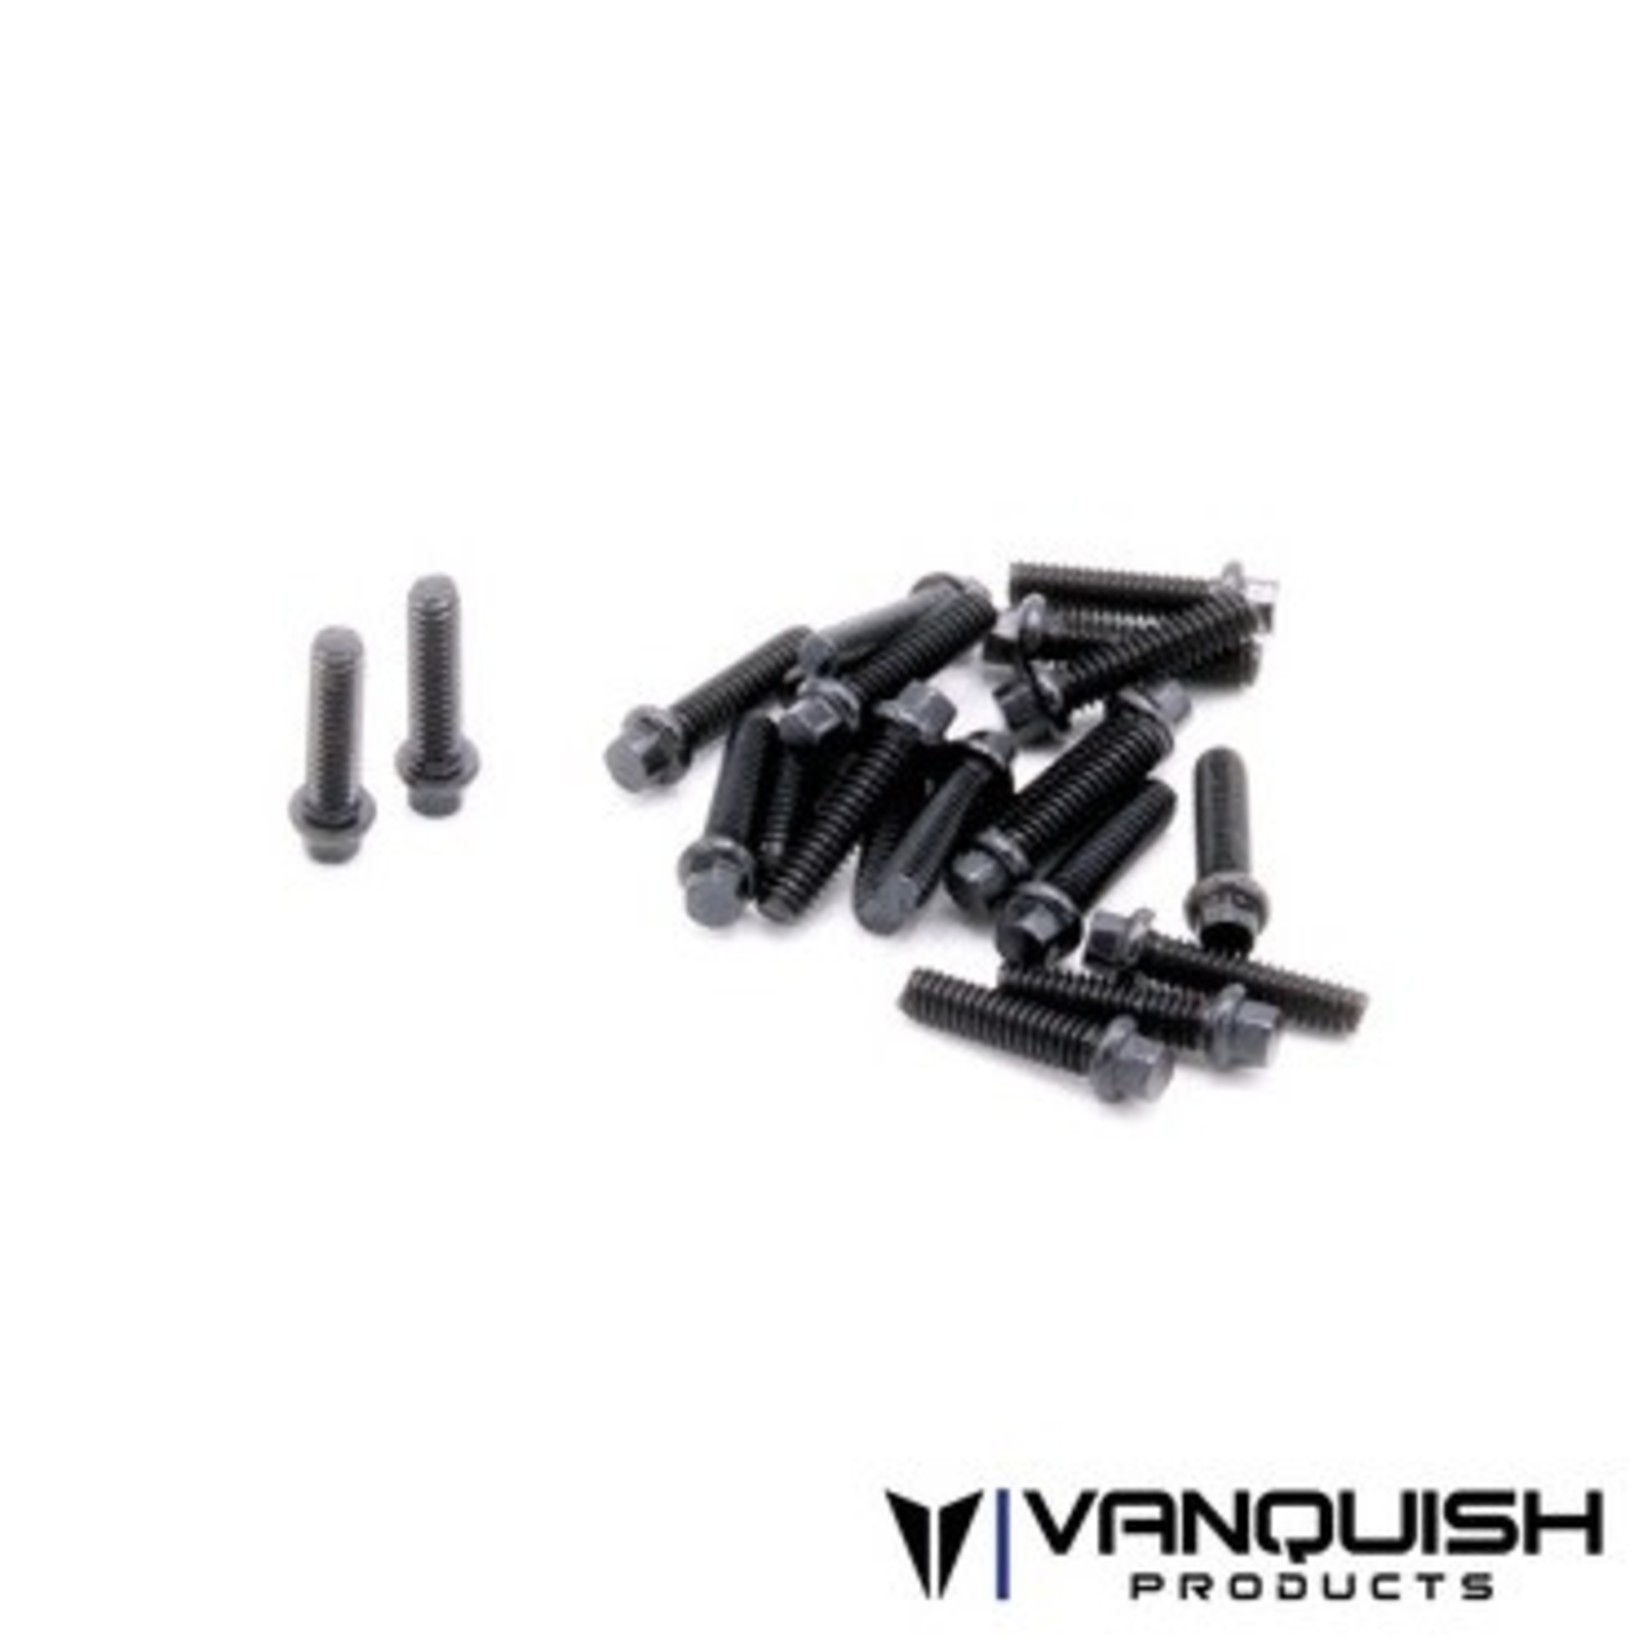 Vanquish Products Vanquish Products Scale M2x8 Black Hardware #VPS01711